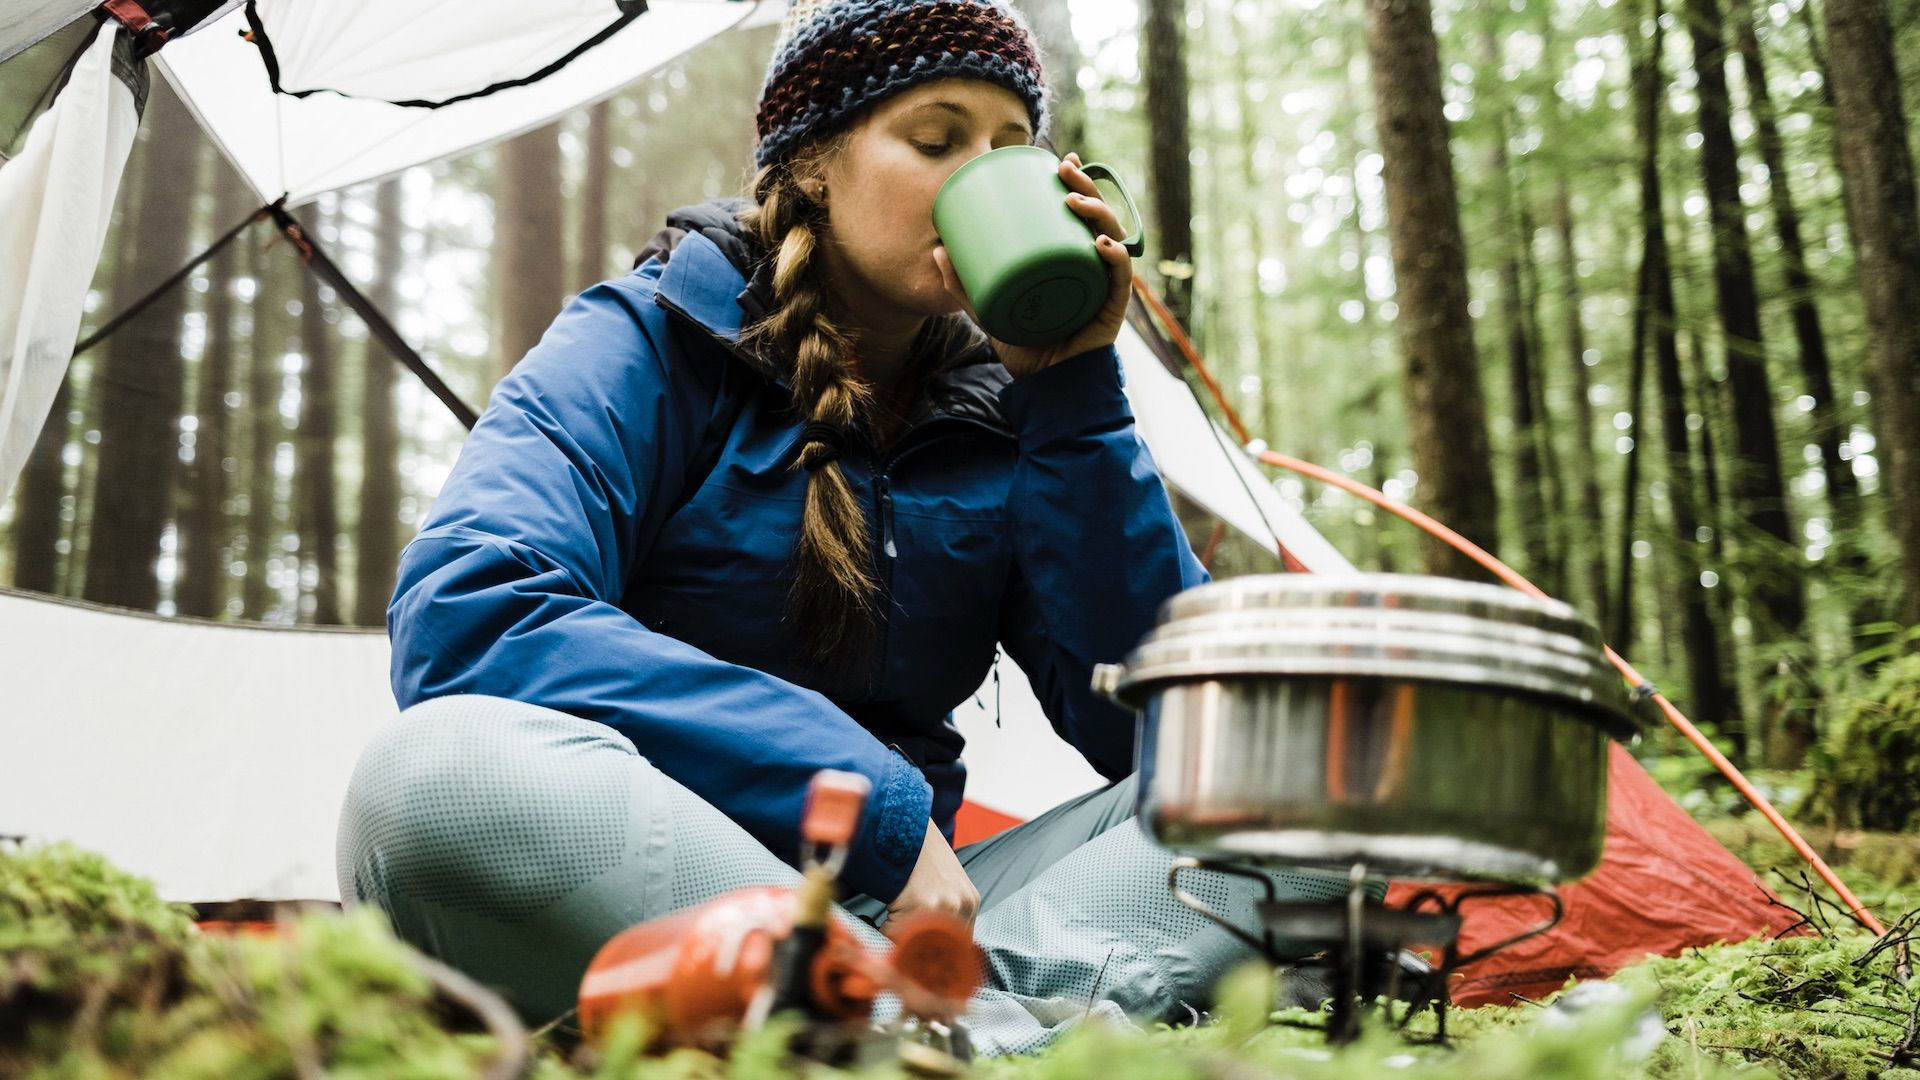 Can you rely on a budget camping stove?